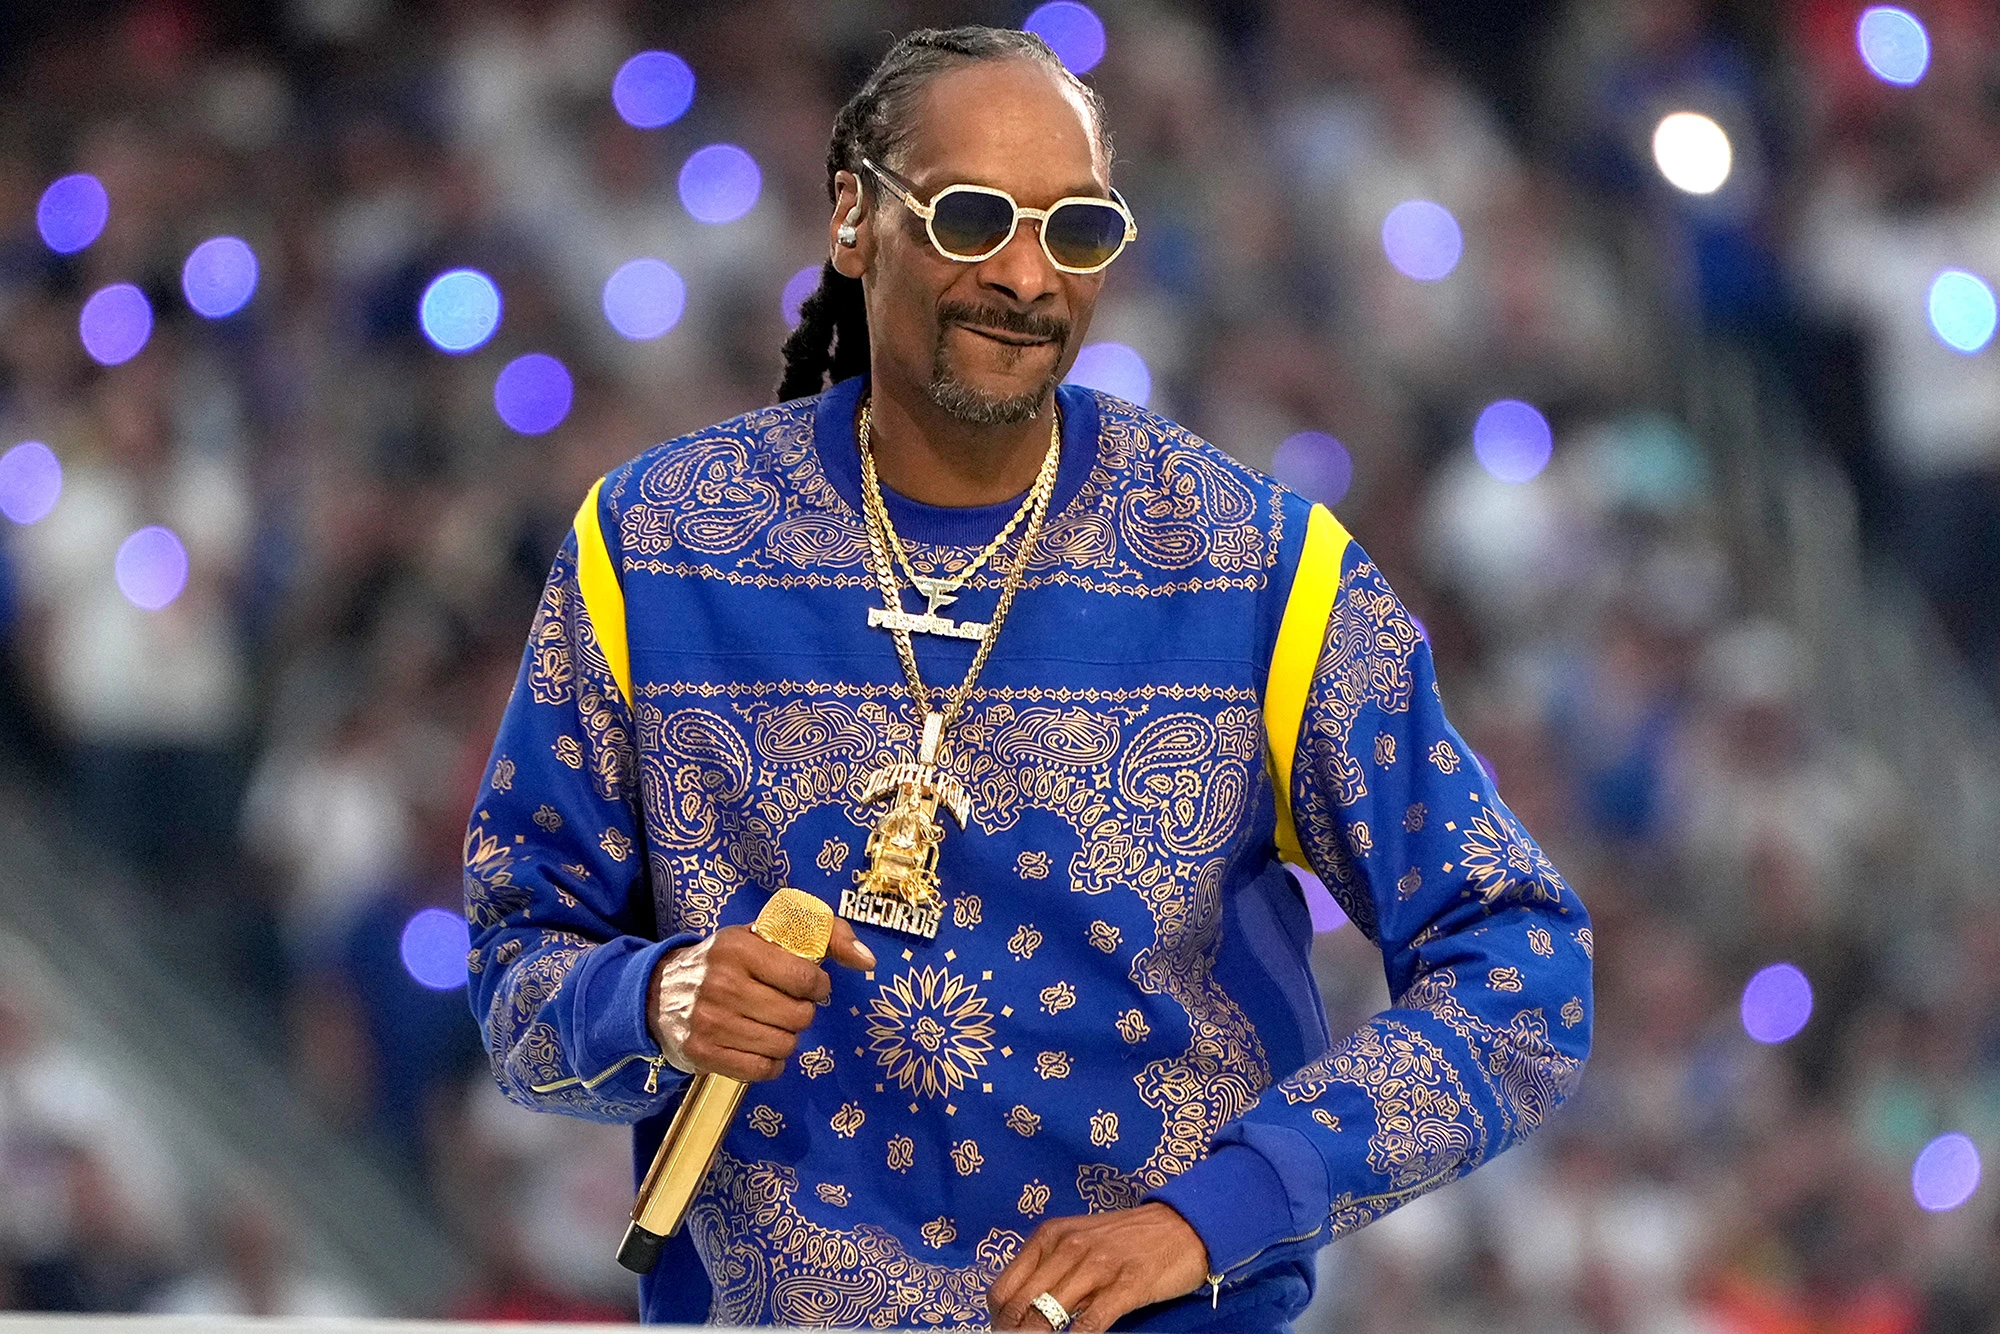 SNOOP DOGG BECOMES ANIMATED IN NEW ‘DOGGYLAND’ CHILDREN’S SERIES